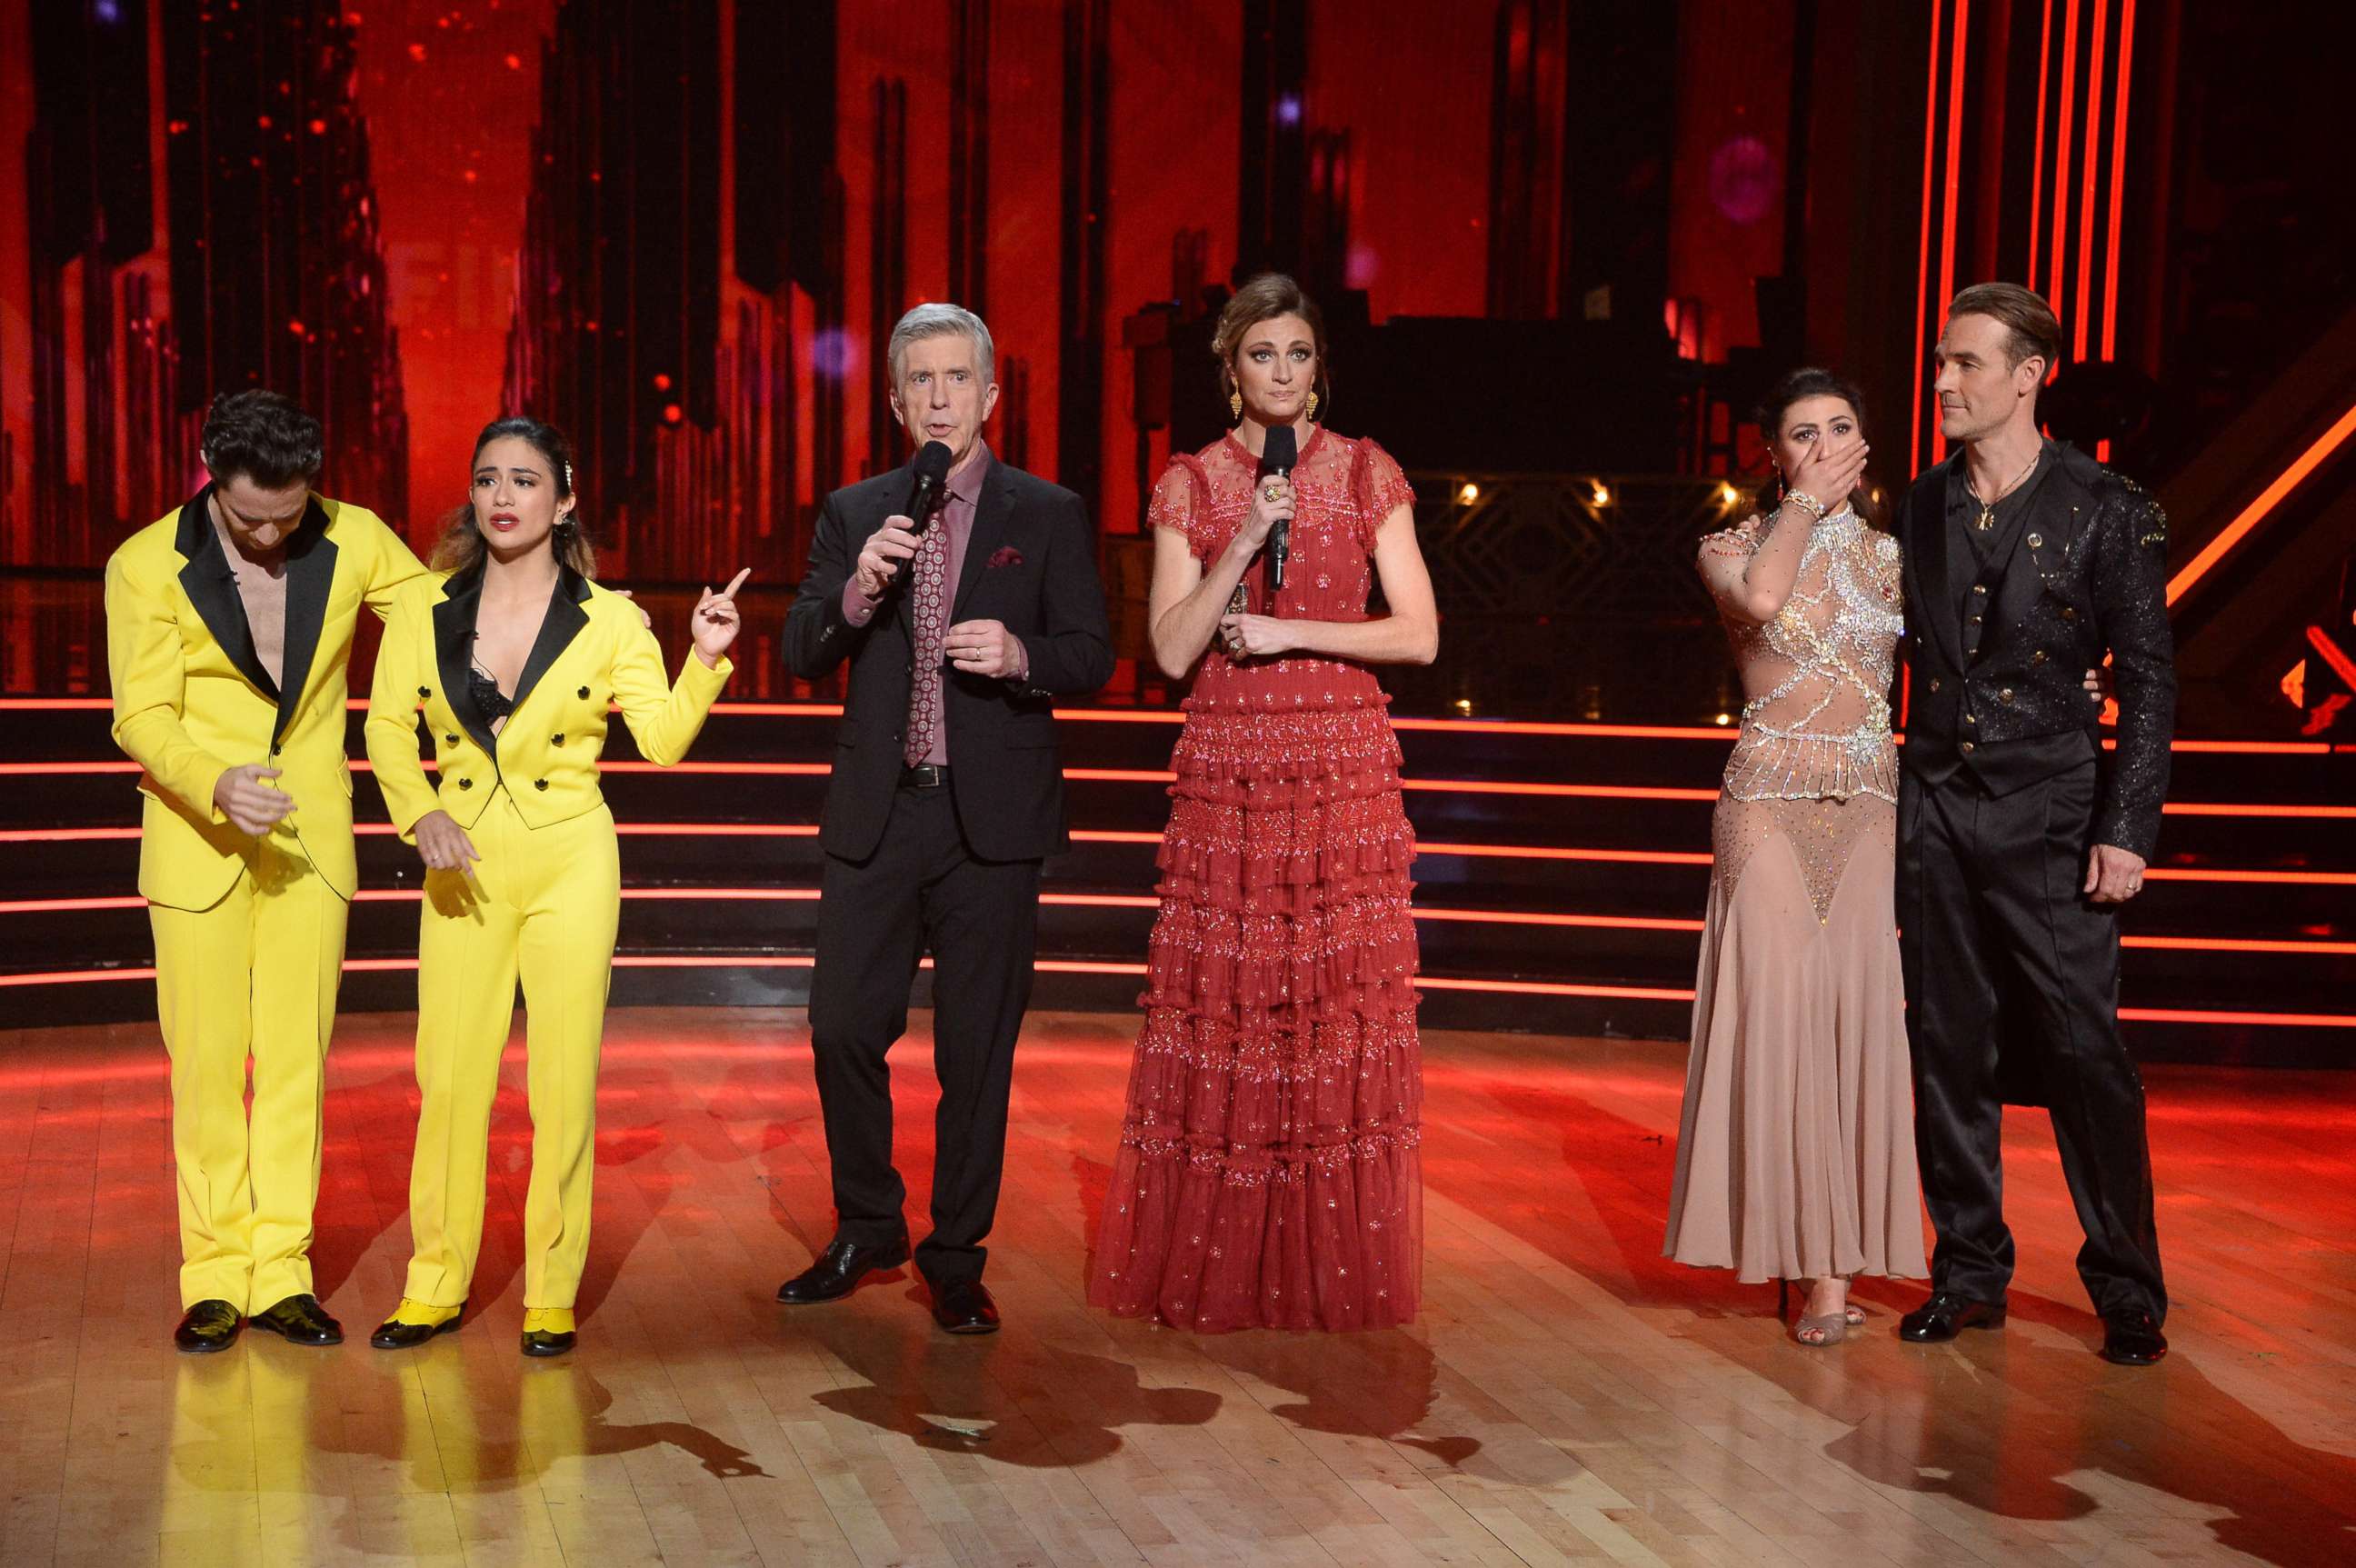 PHOTO: Five celebrity and pro-dancer couples return to the ballroom to compete on the 10th week of the 2019 season of "Dancing with the Stars," Nov. 18, 2019.